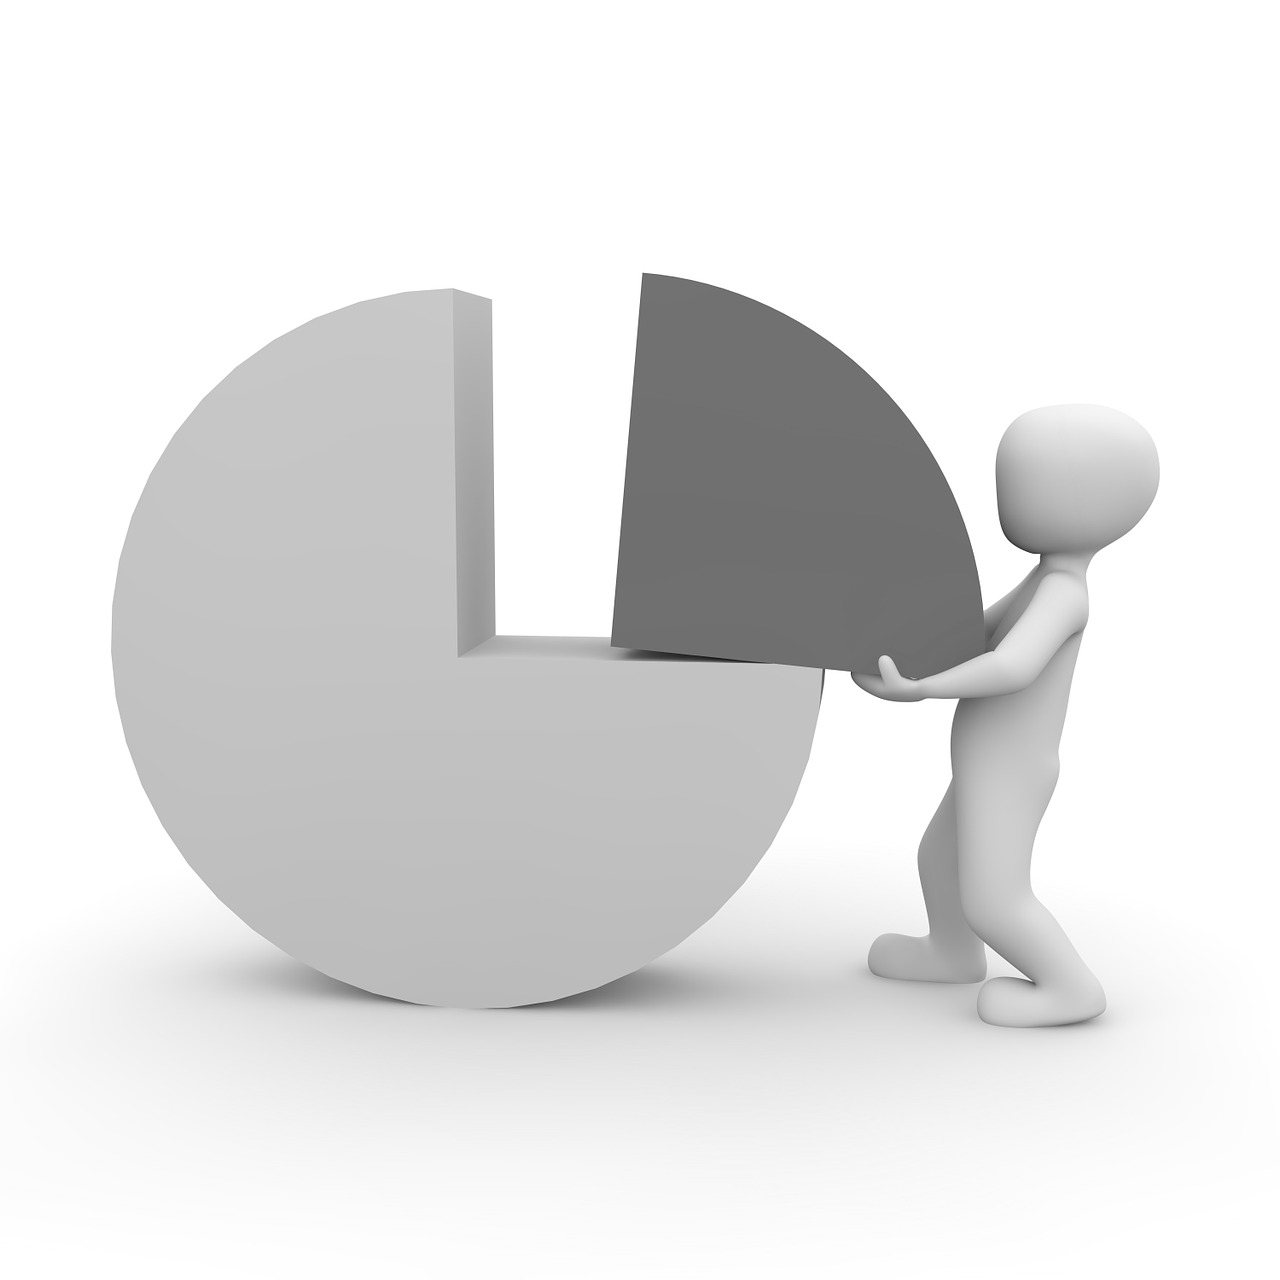 a person standing next to a pie chart, trending on pixabay, analytical art, gray anthropomorphic, 3 d image, reaching, cut-away